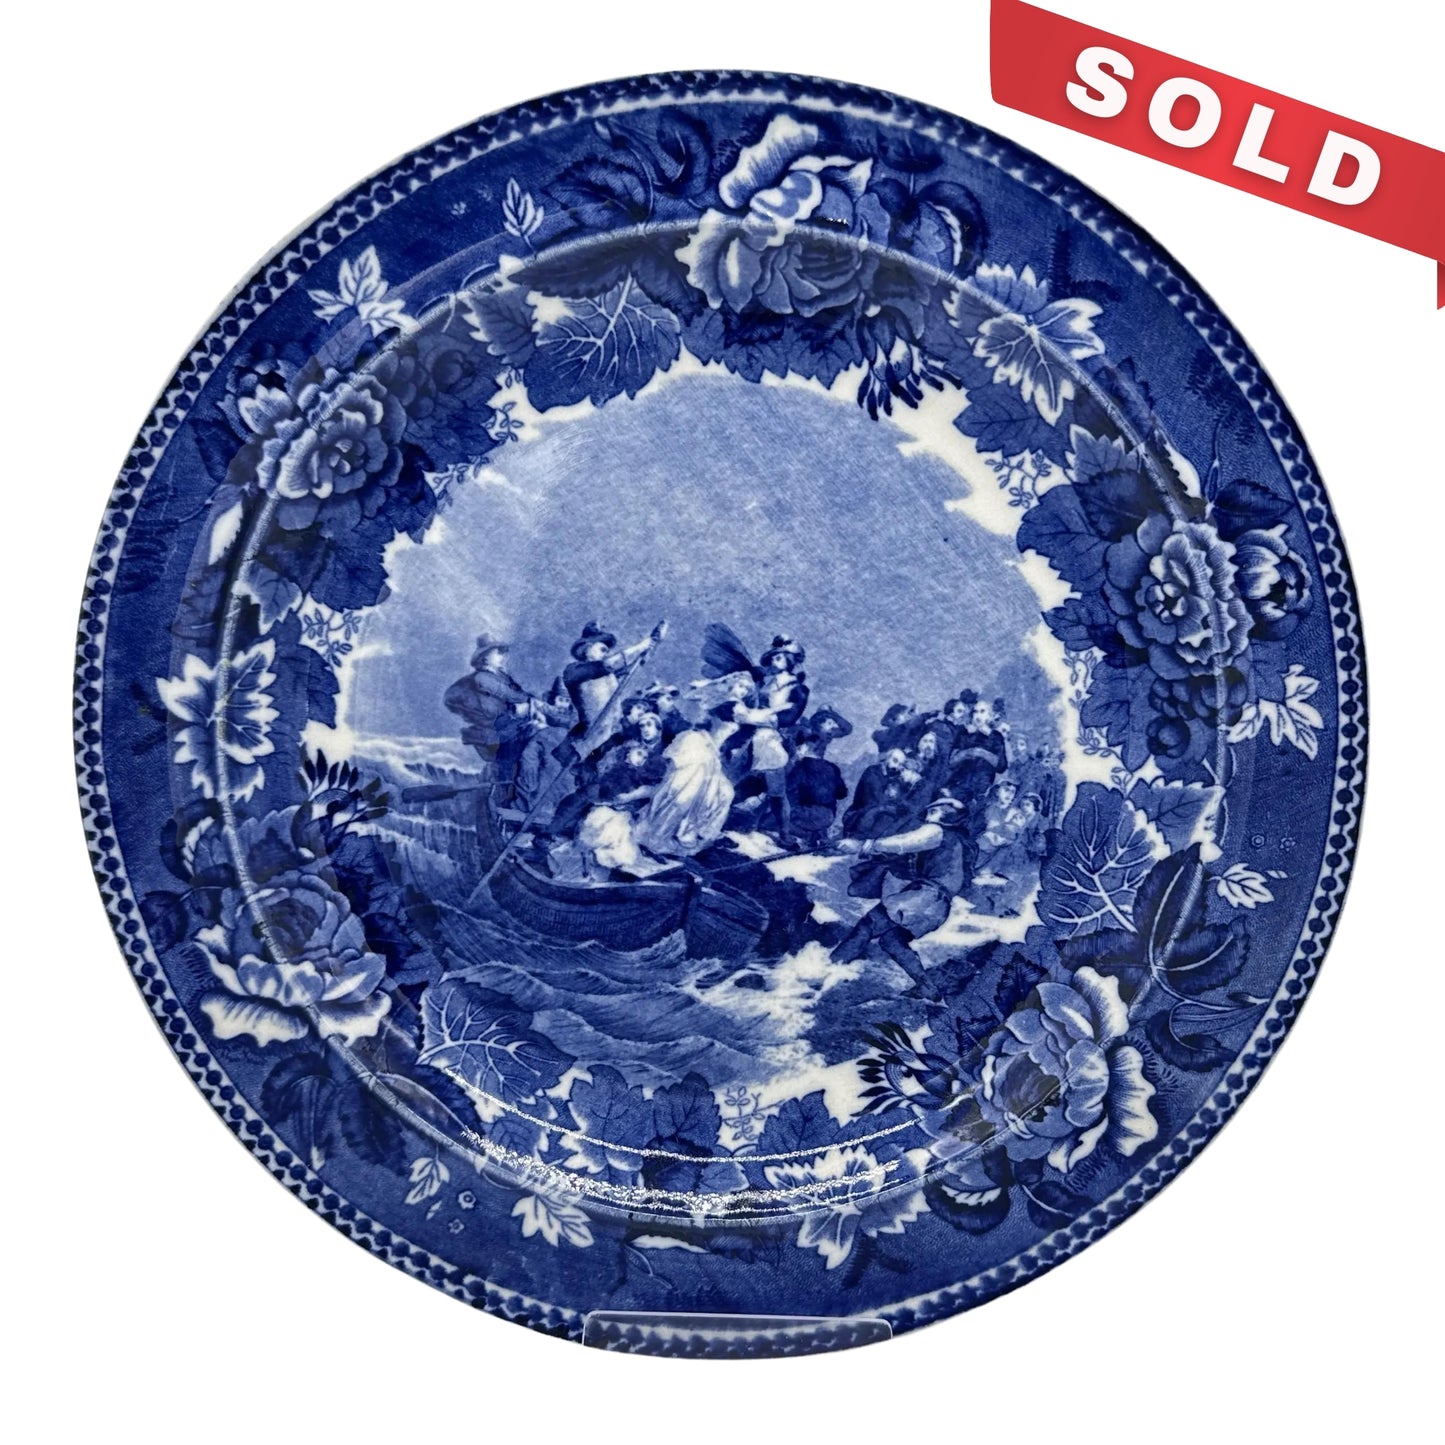 Historical plates from Staffordshire and Wedgwood